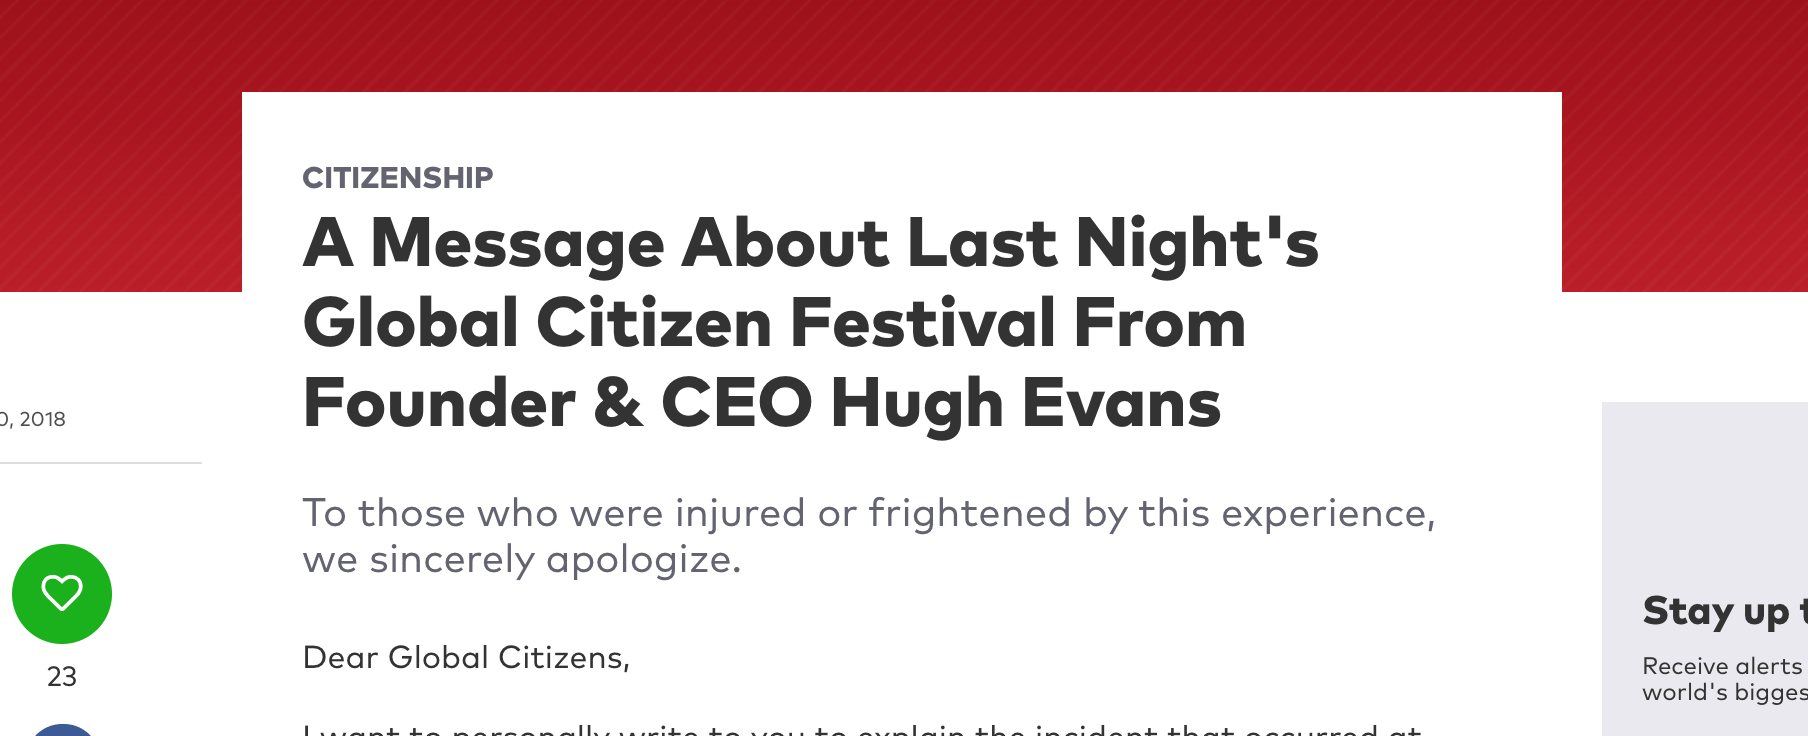 False Alarm or Not - This Experience was Terrifying - The Global Citizen Festival 2018